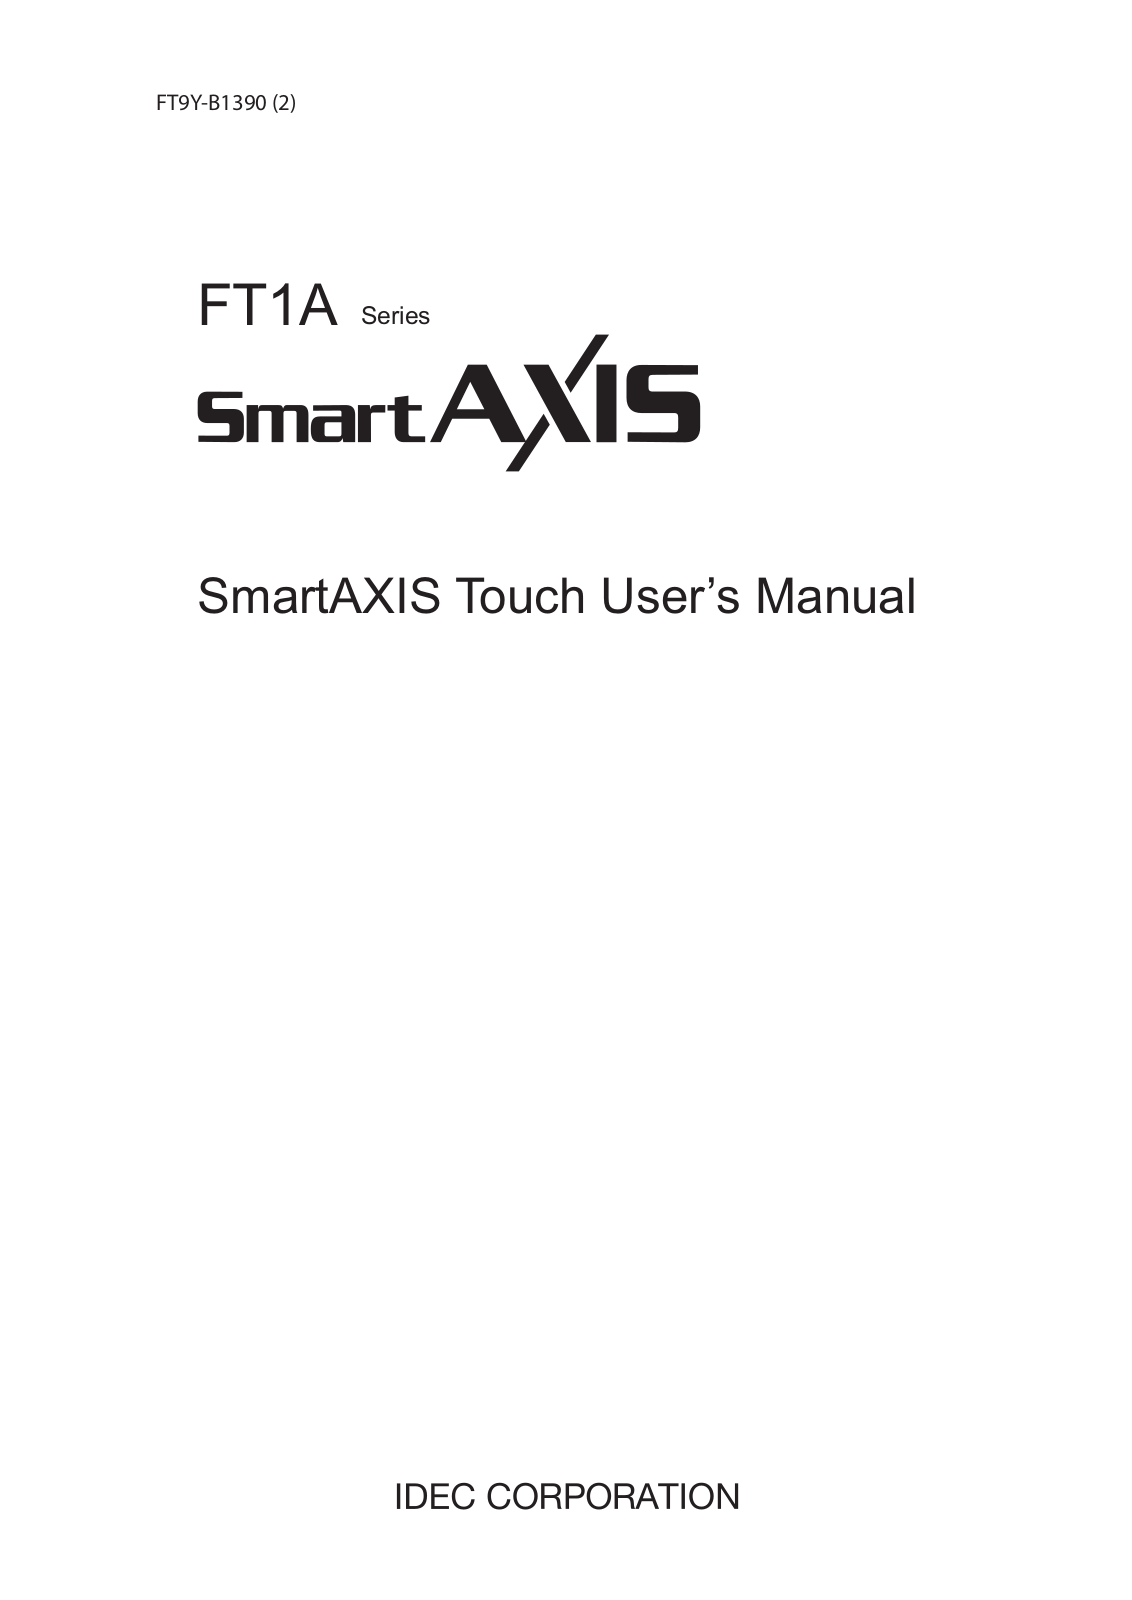 IDEC FT1A Series Users Manual